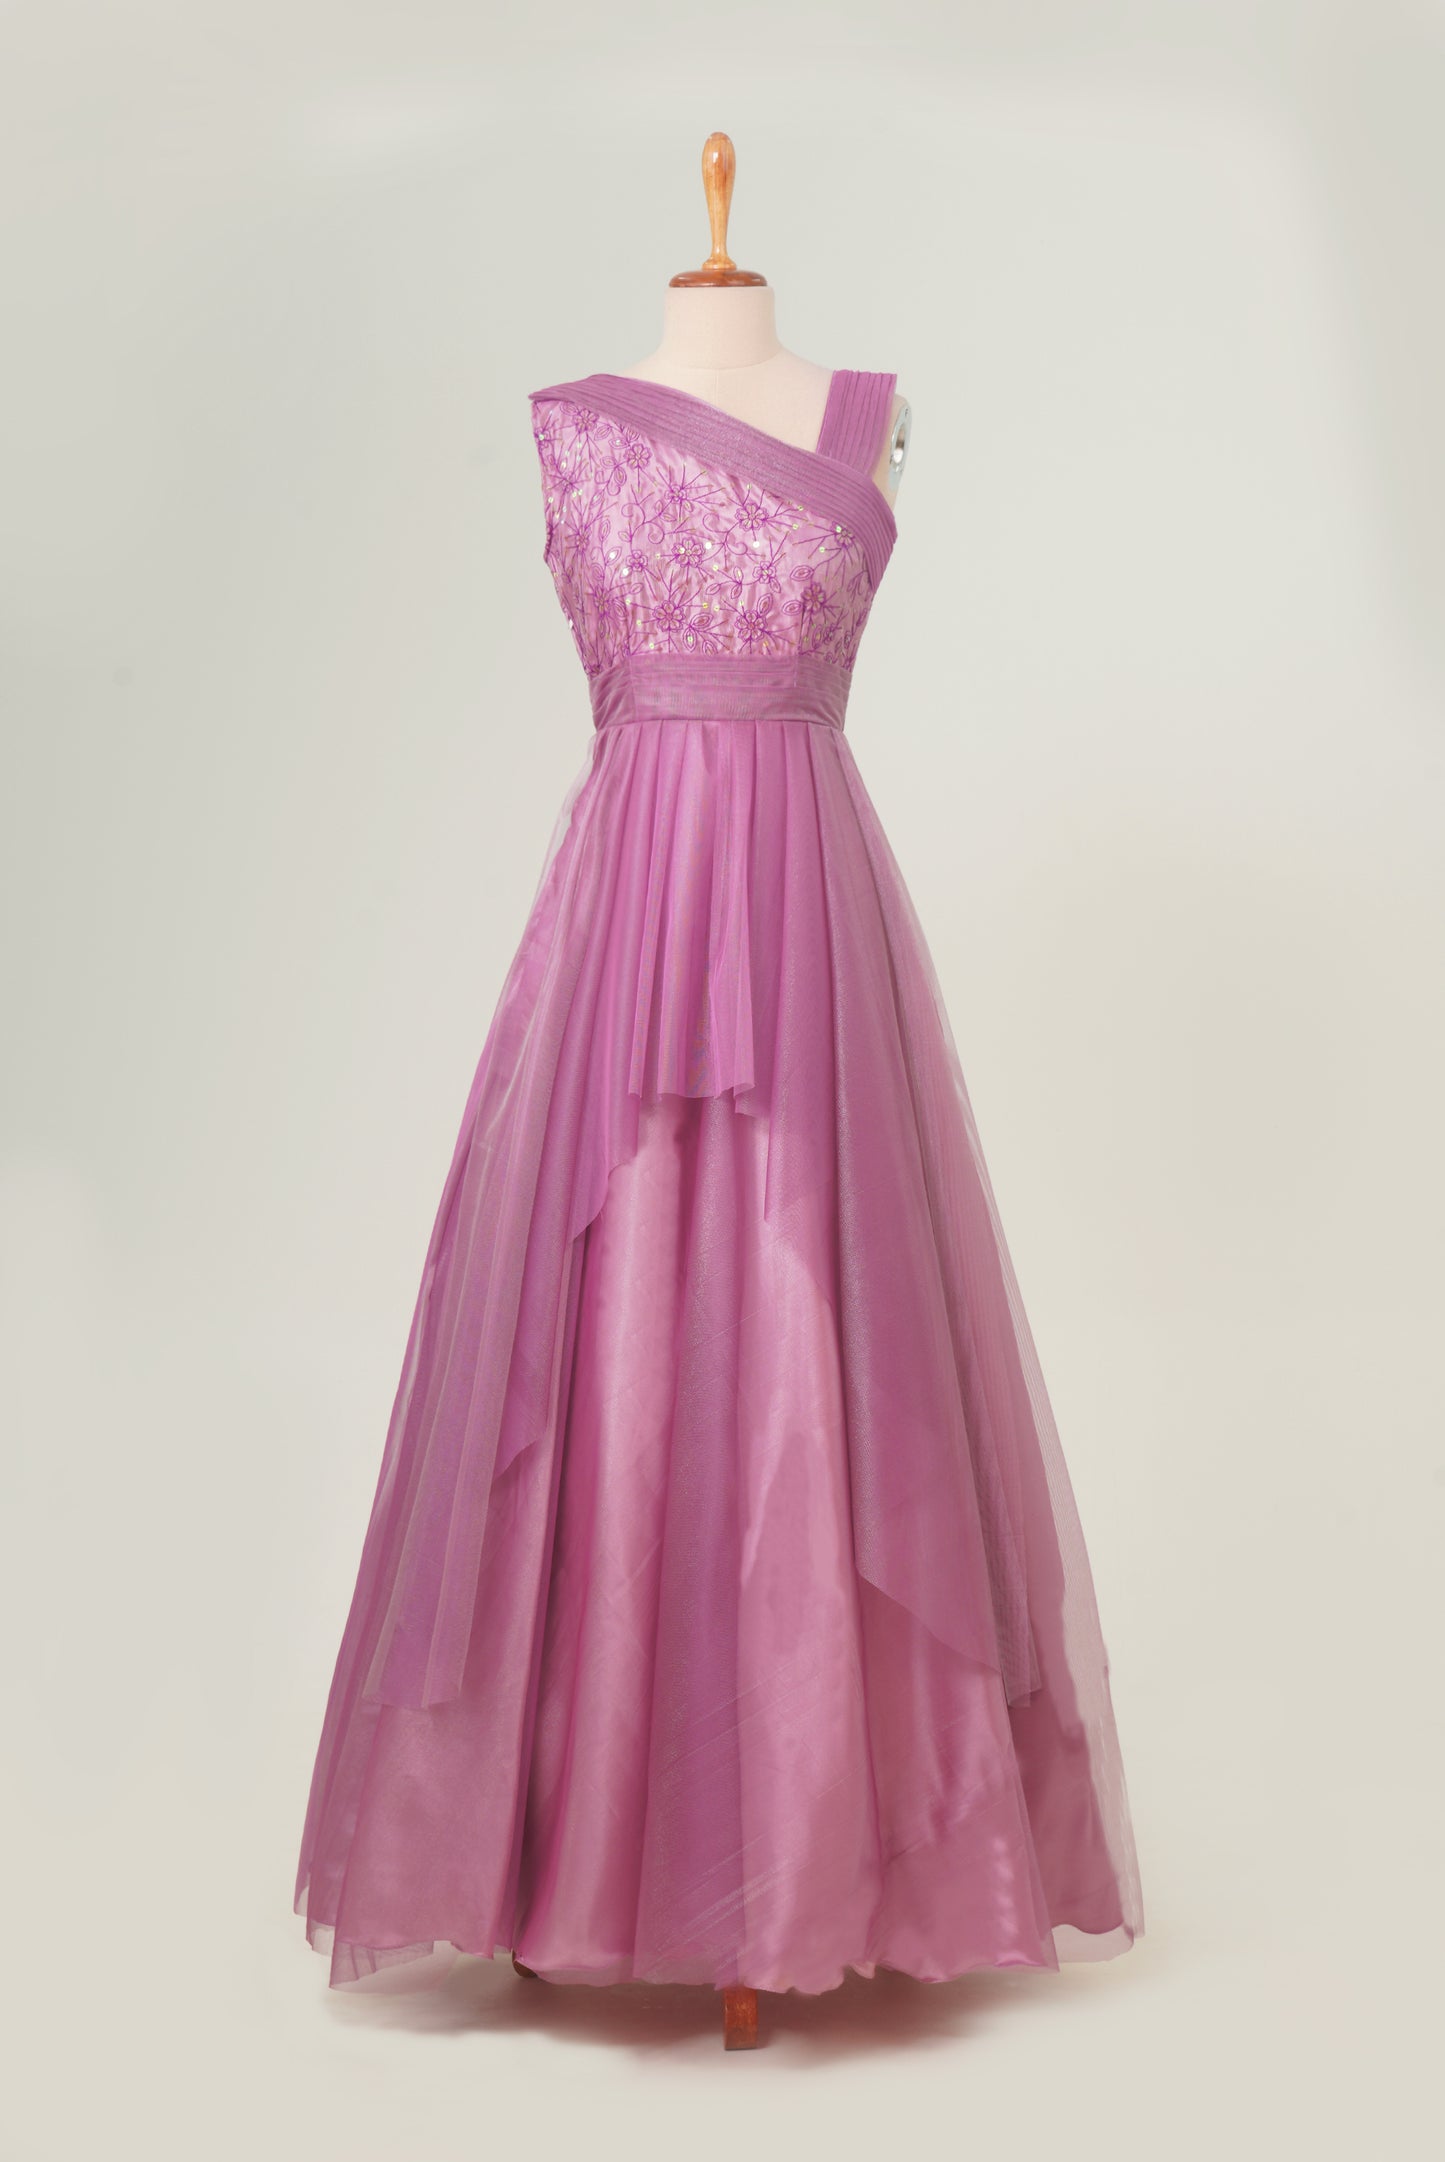 ZP003 Pink Netted Gown with Asymmetric Neck